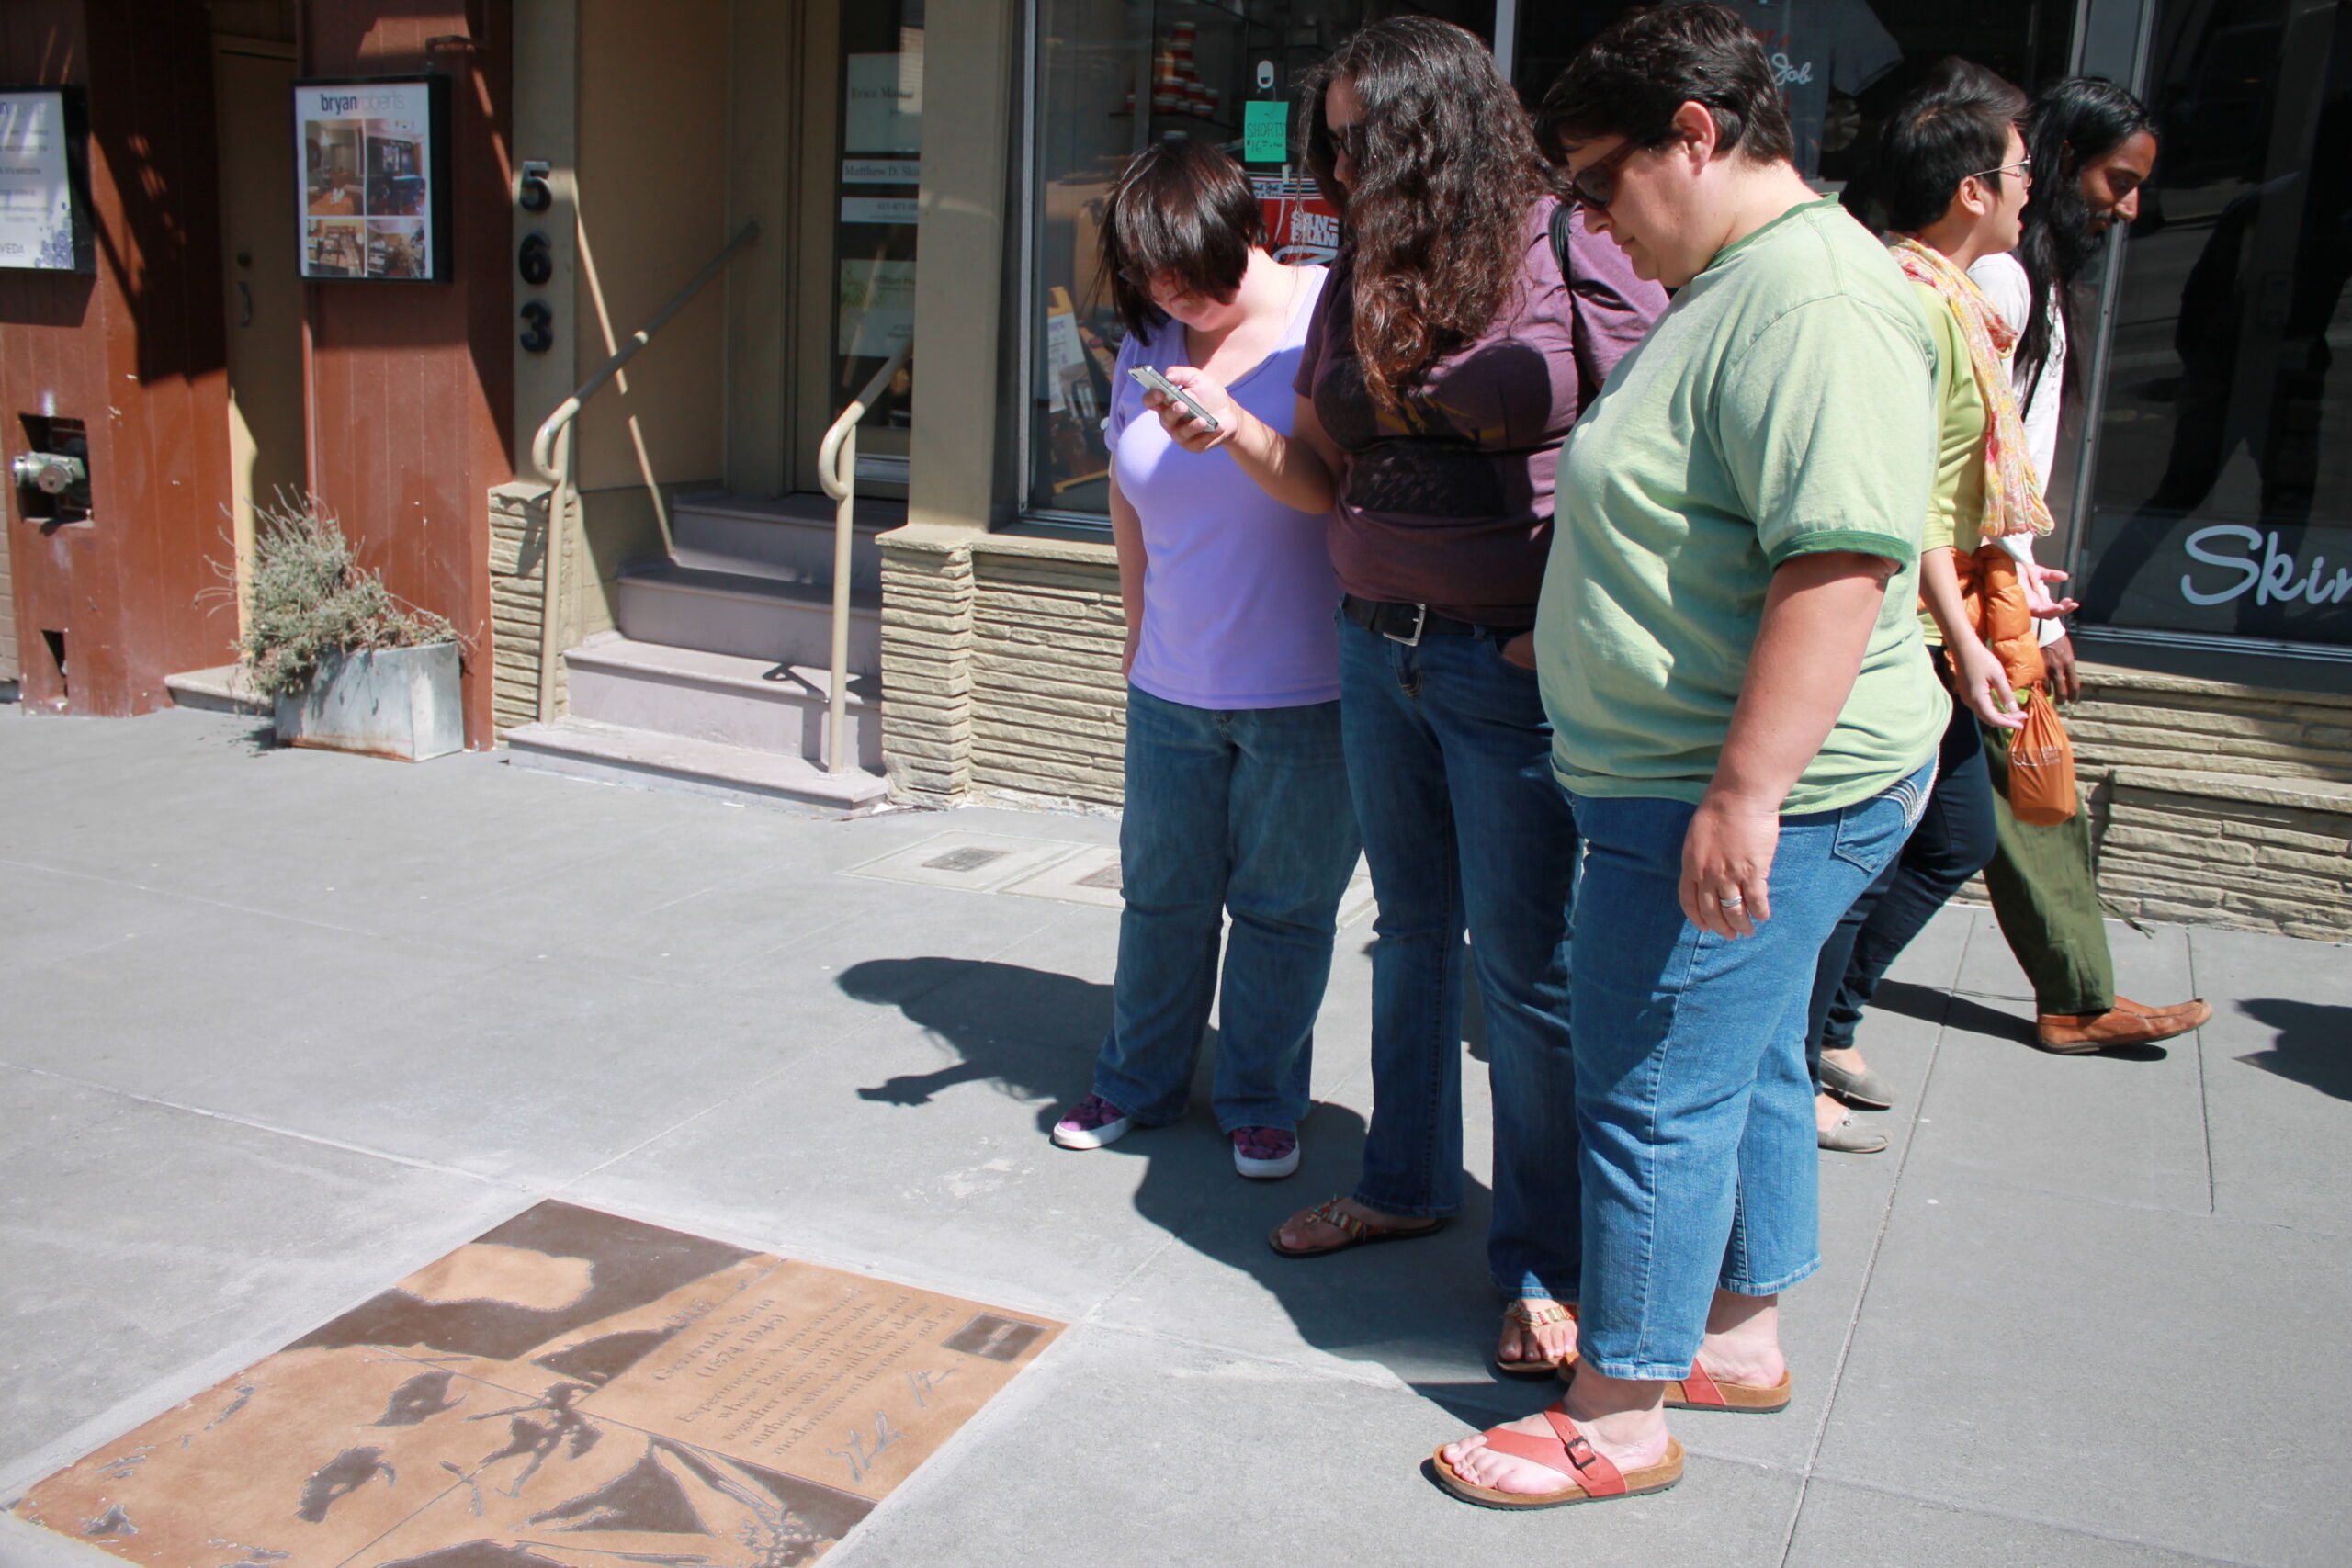 Former San Francisco Assistant District Attorney Rebecca Prozan, foreground, her wife, attorney Julia Adams, background, and their friend, center, pause to read the plaque honoring American lesbian writer Gertrude Stein outside of Hand Job Nails and Spa on Castro Street near 19th Street. (Photo: Heather Cassell)